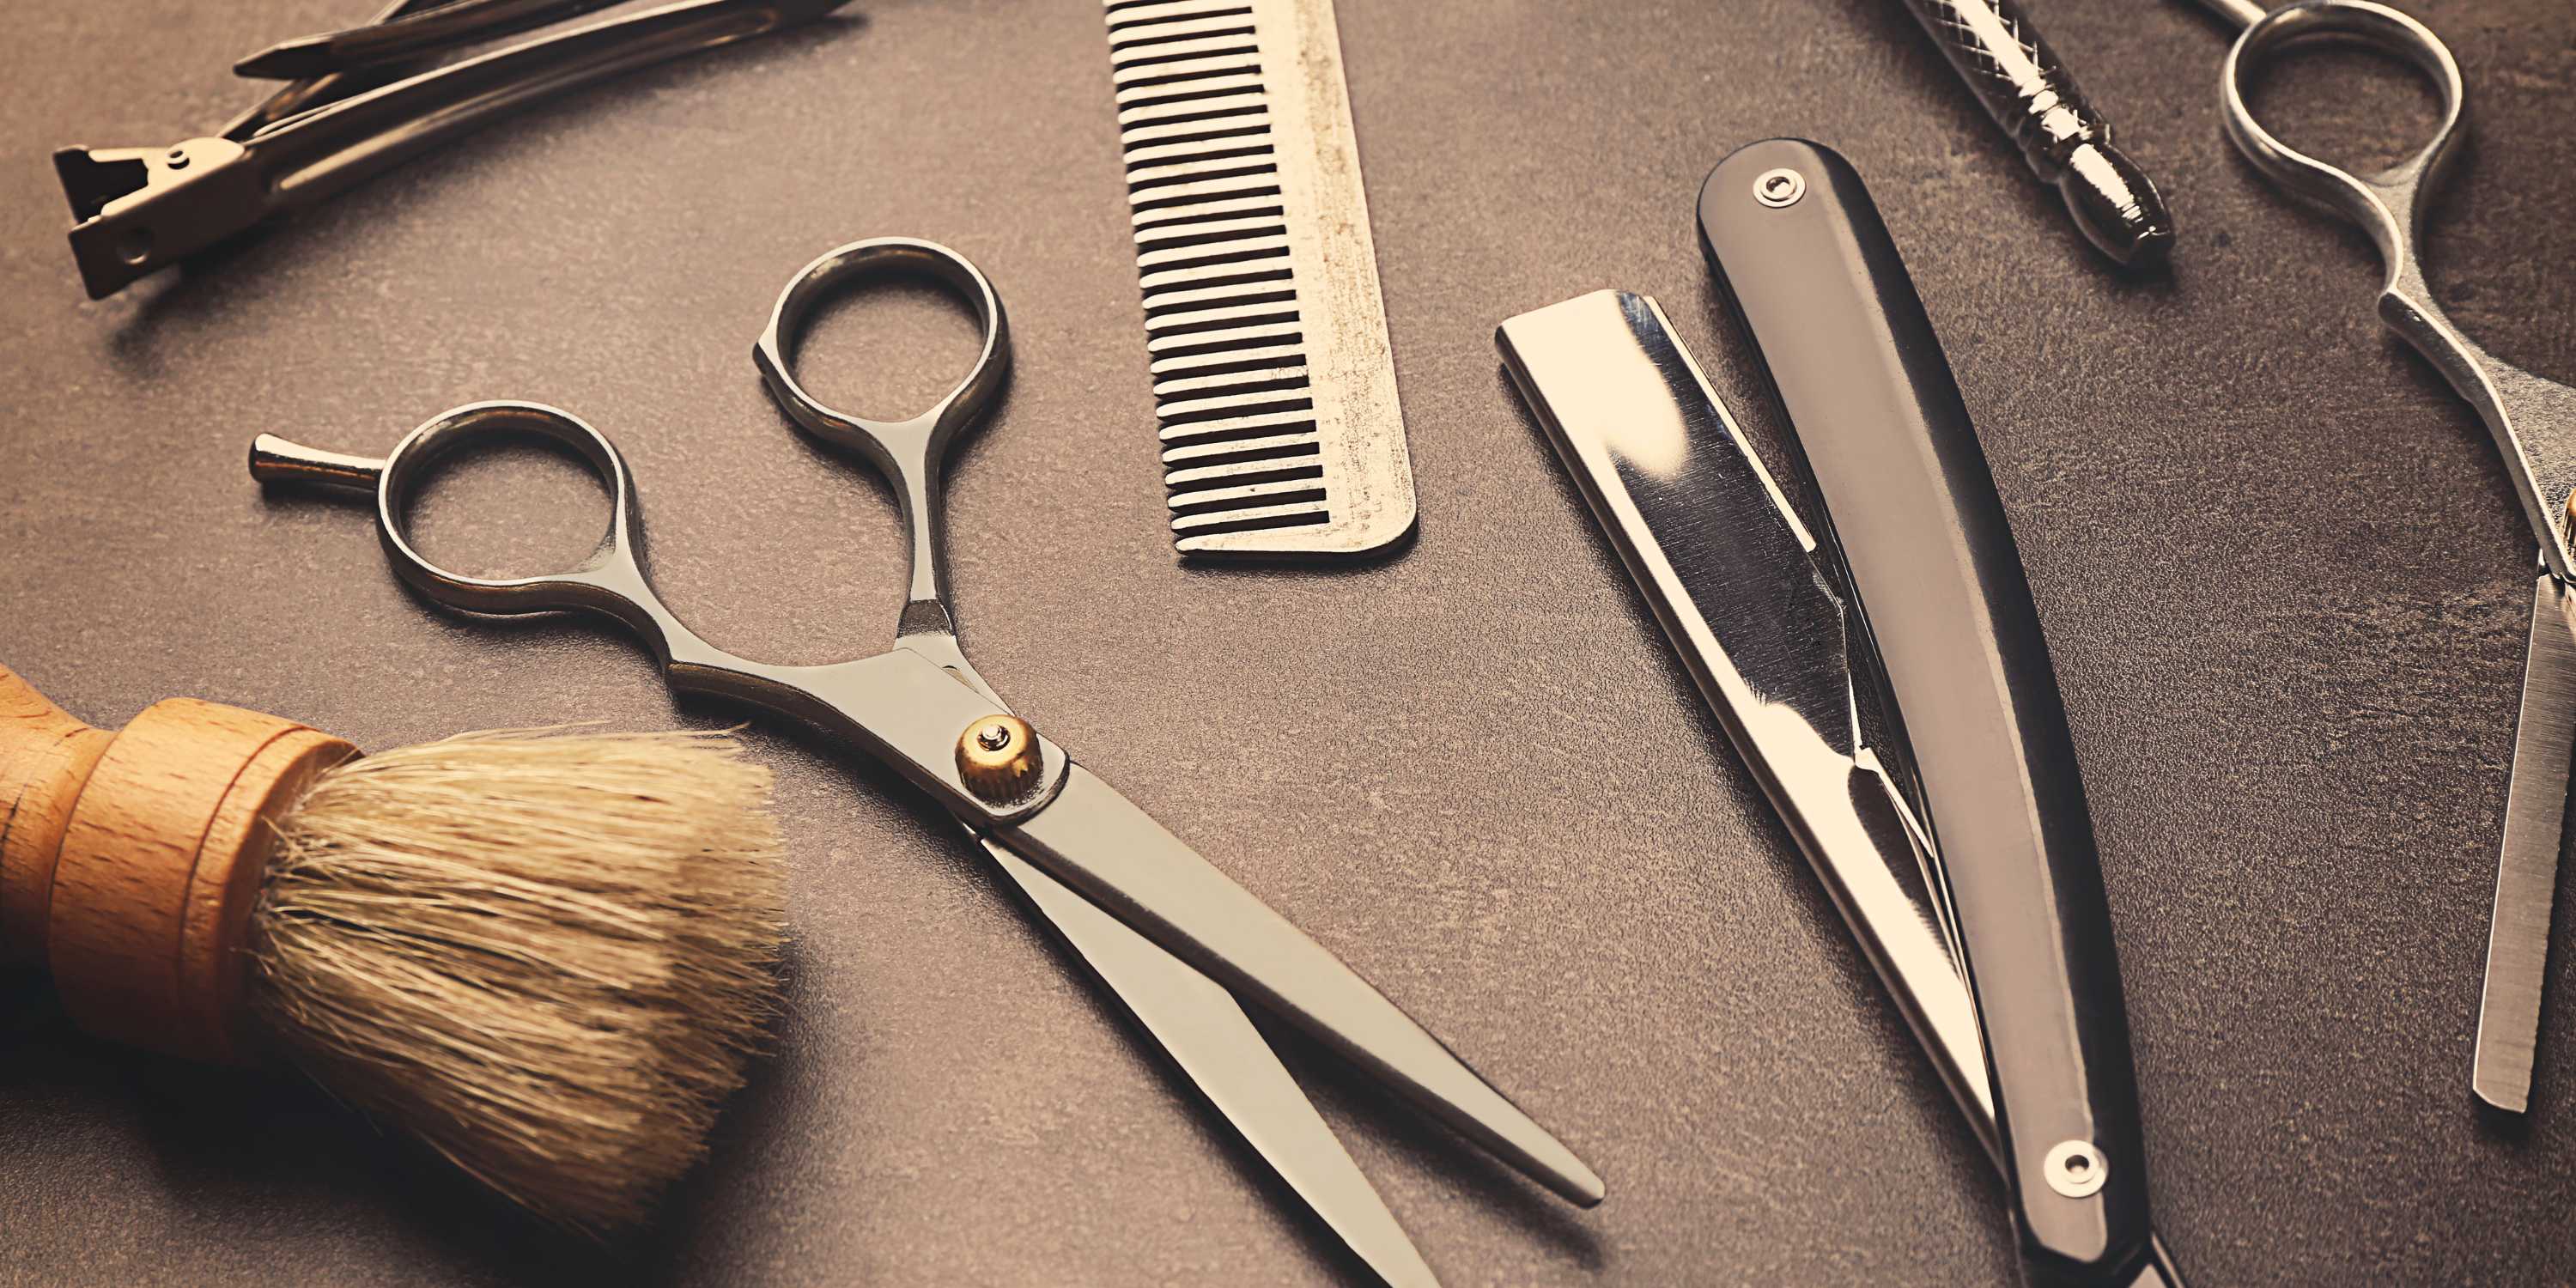 Material Matters: The Craftsmanship of Hair Shears Across the Steel Spectrum